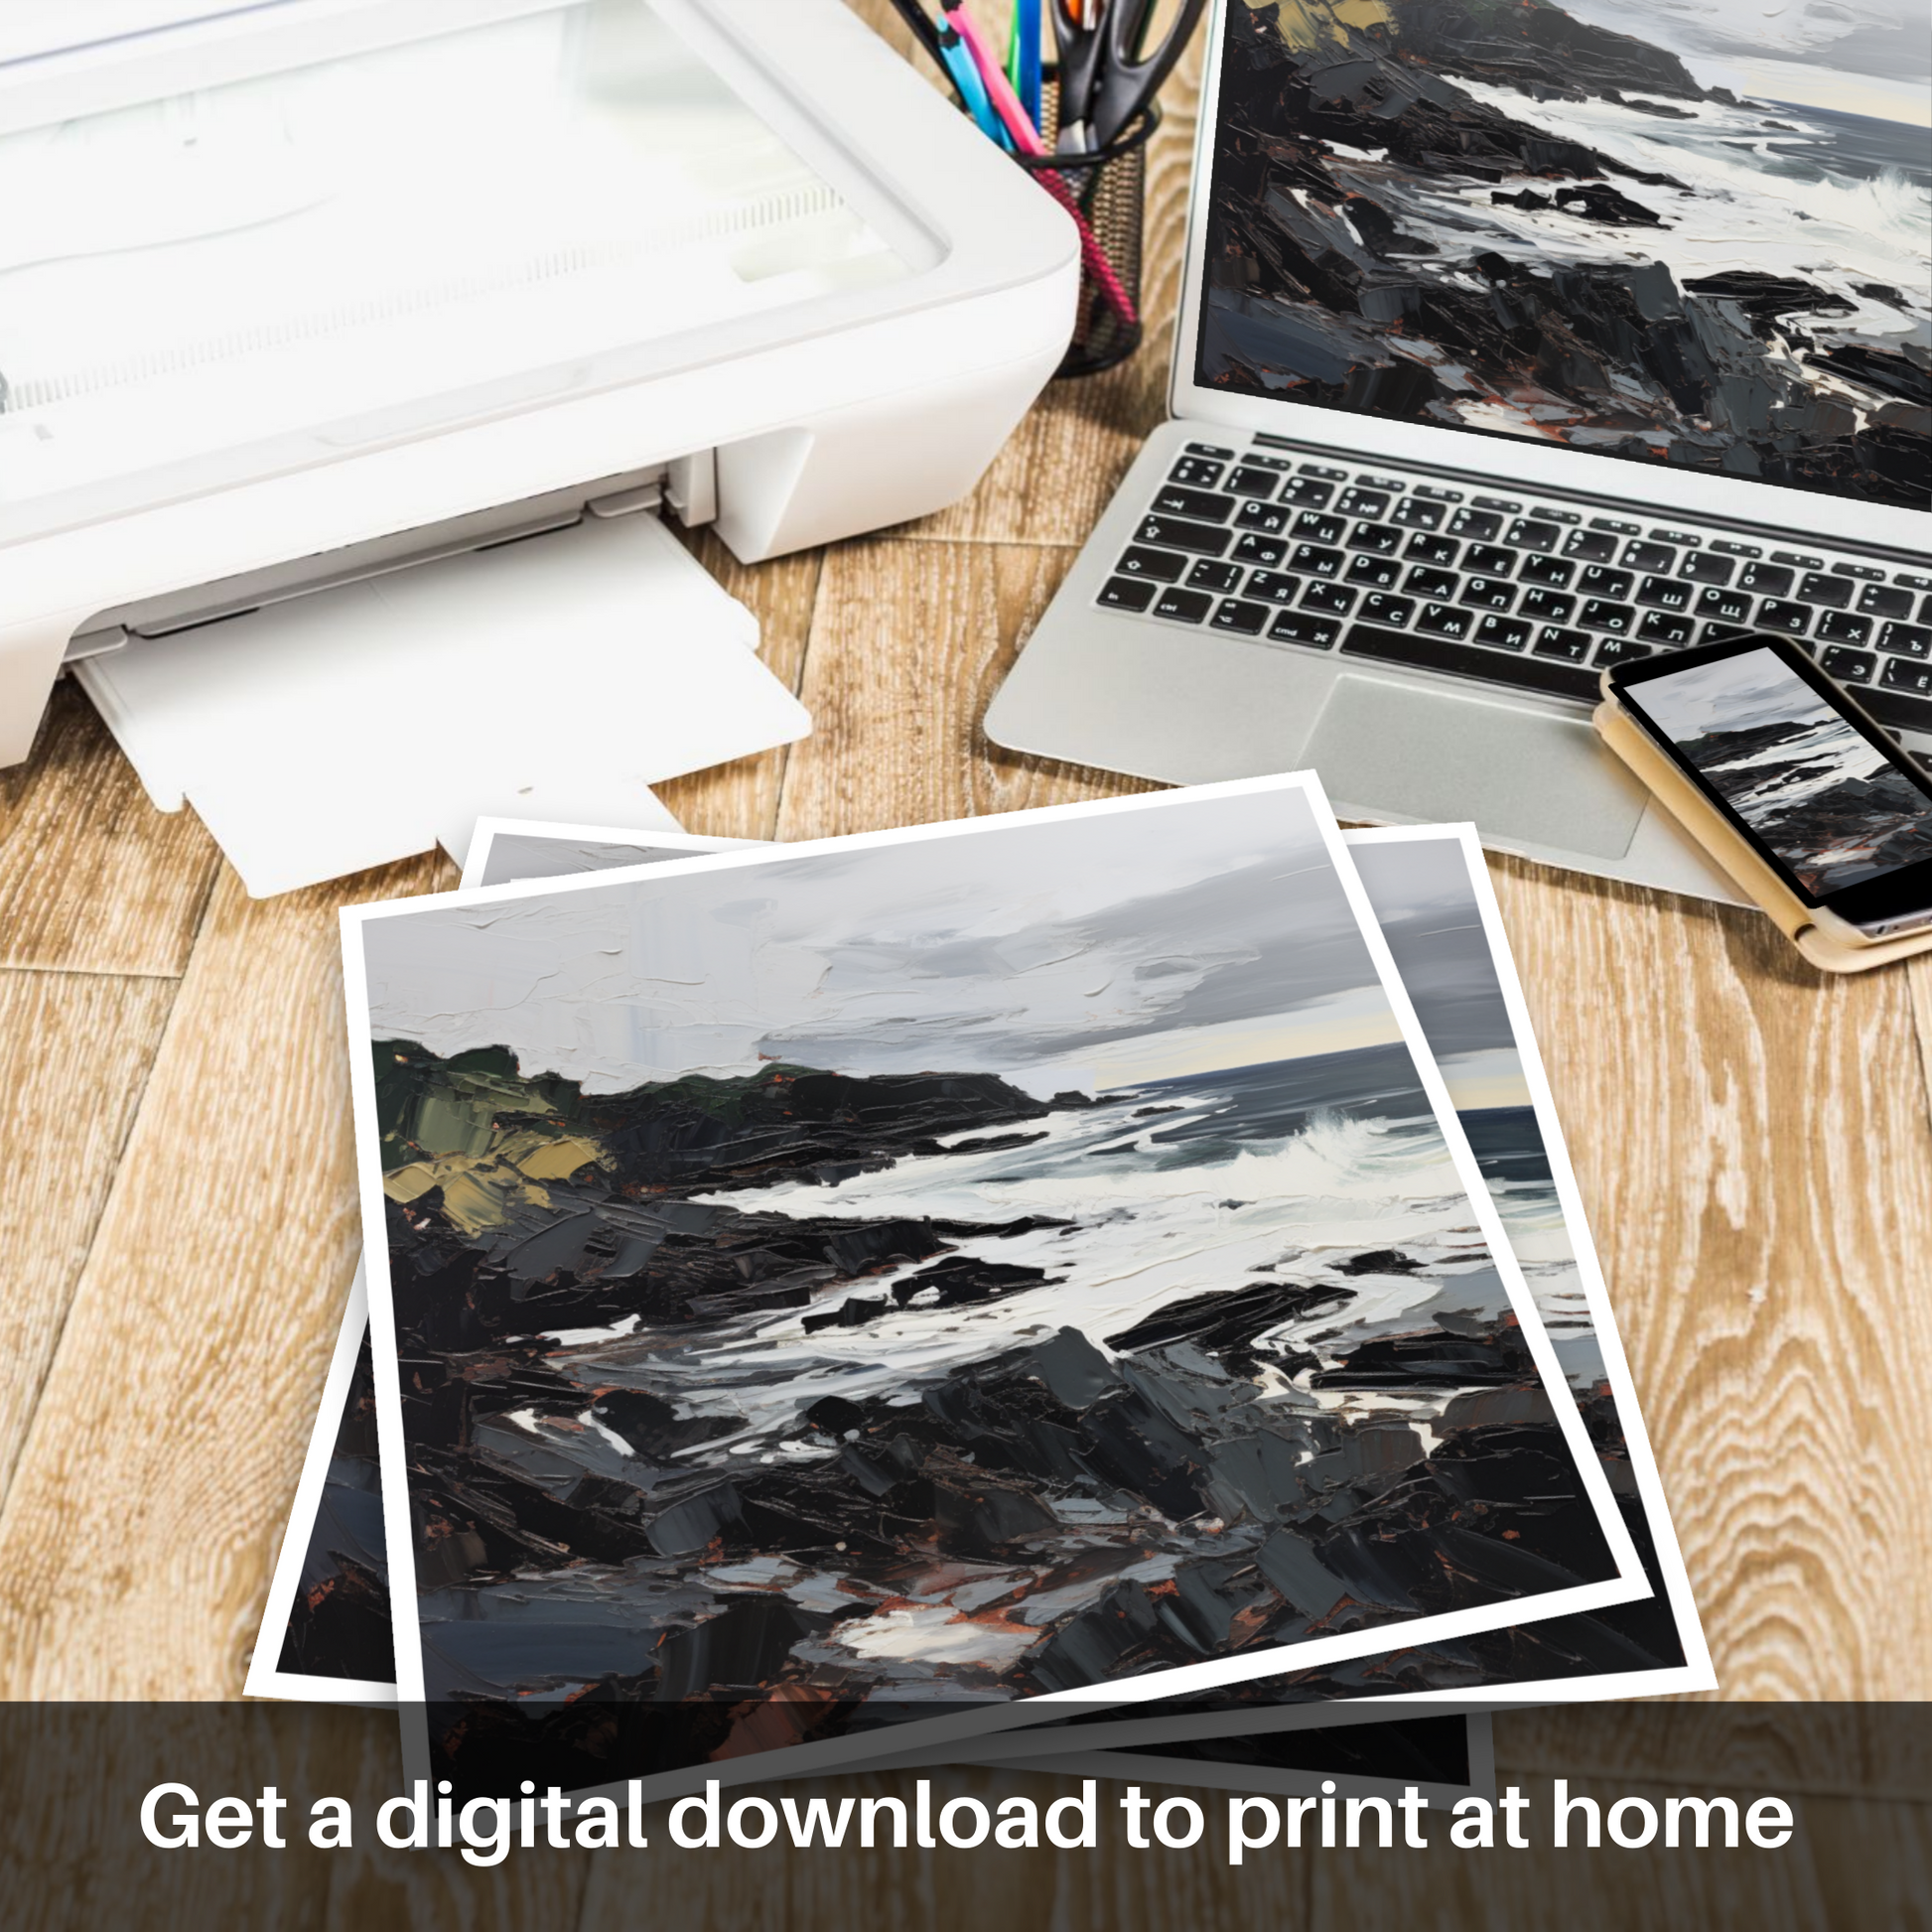 Downloadable and printable picture of Coldingham Bay with a stormy sky